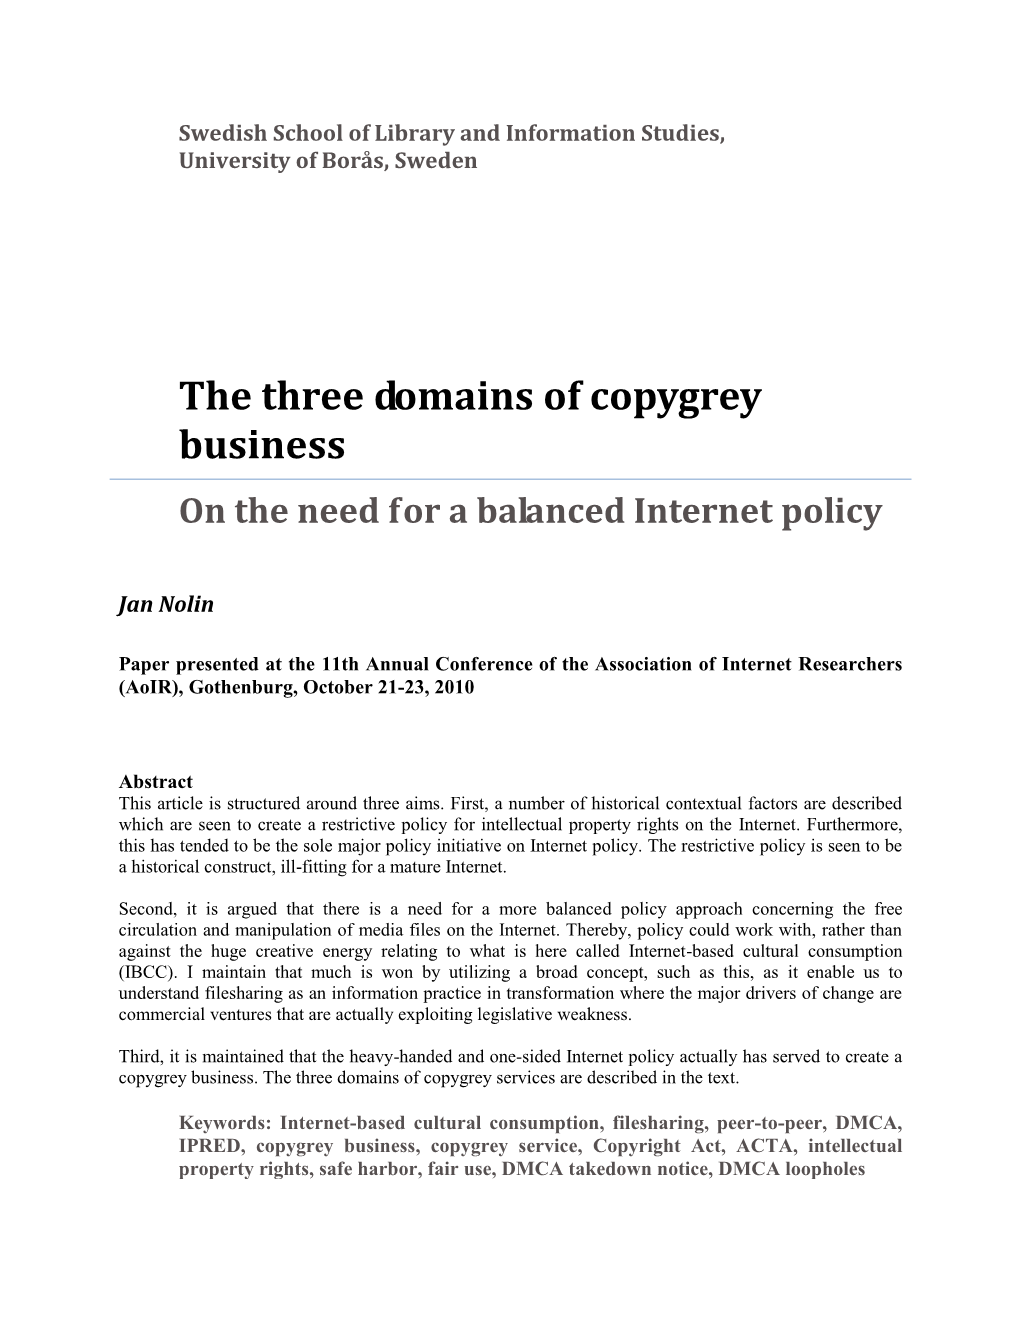 The Three Domains of Copygrey Business on the Need for a Balanced Internet Policy